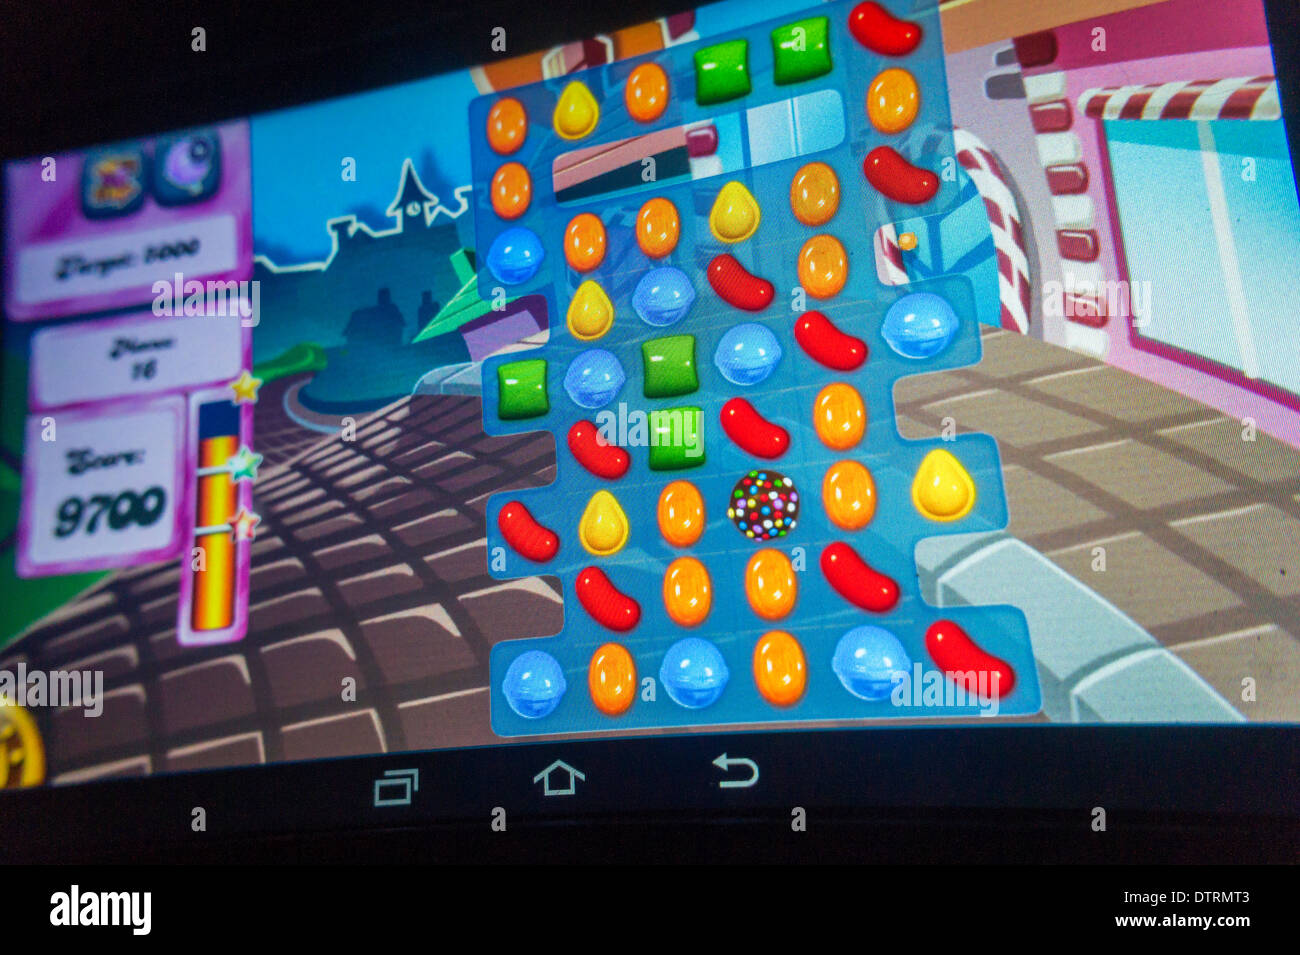 Candy crush game screen hi-res stock photography and images - Alamy